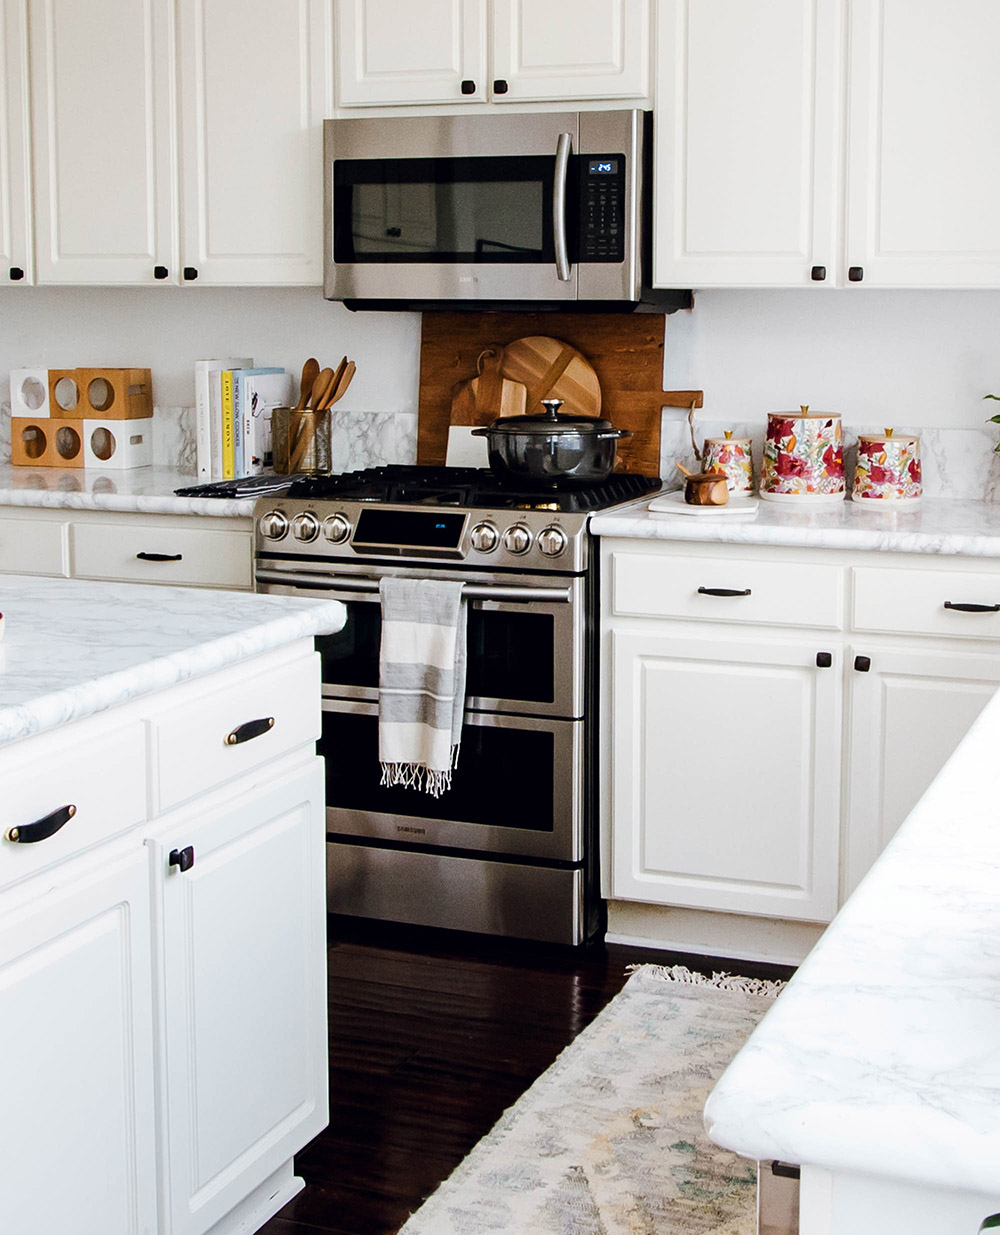 The new kitchen must-have appliances and accessories